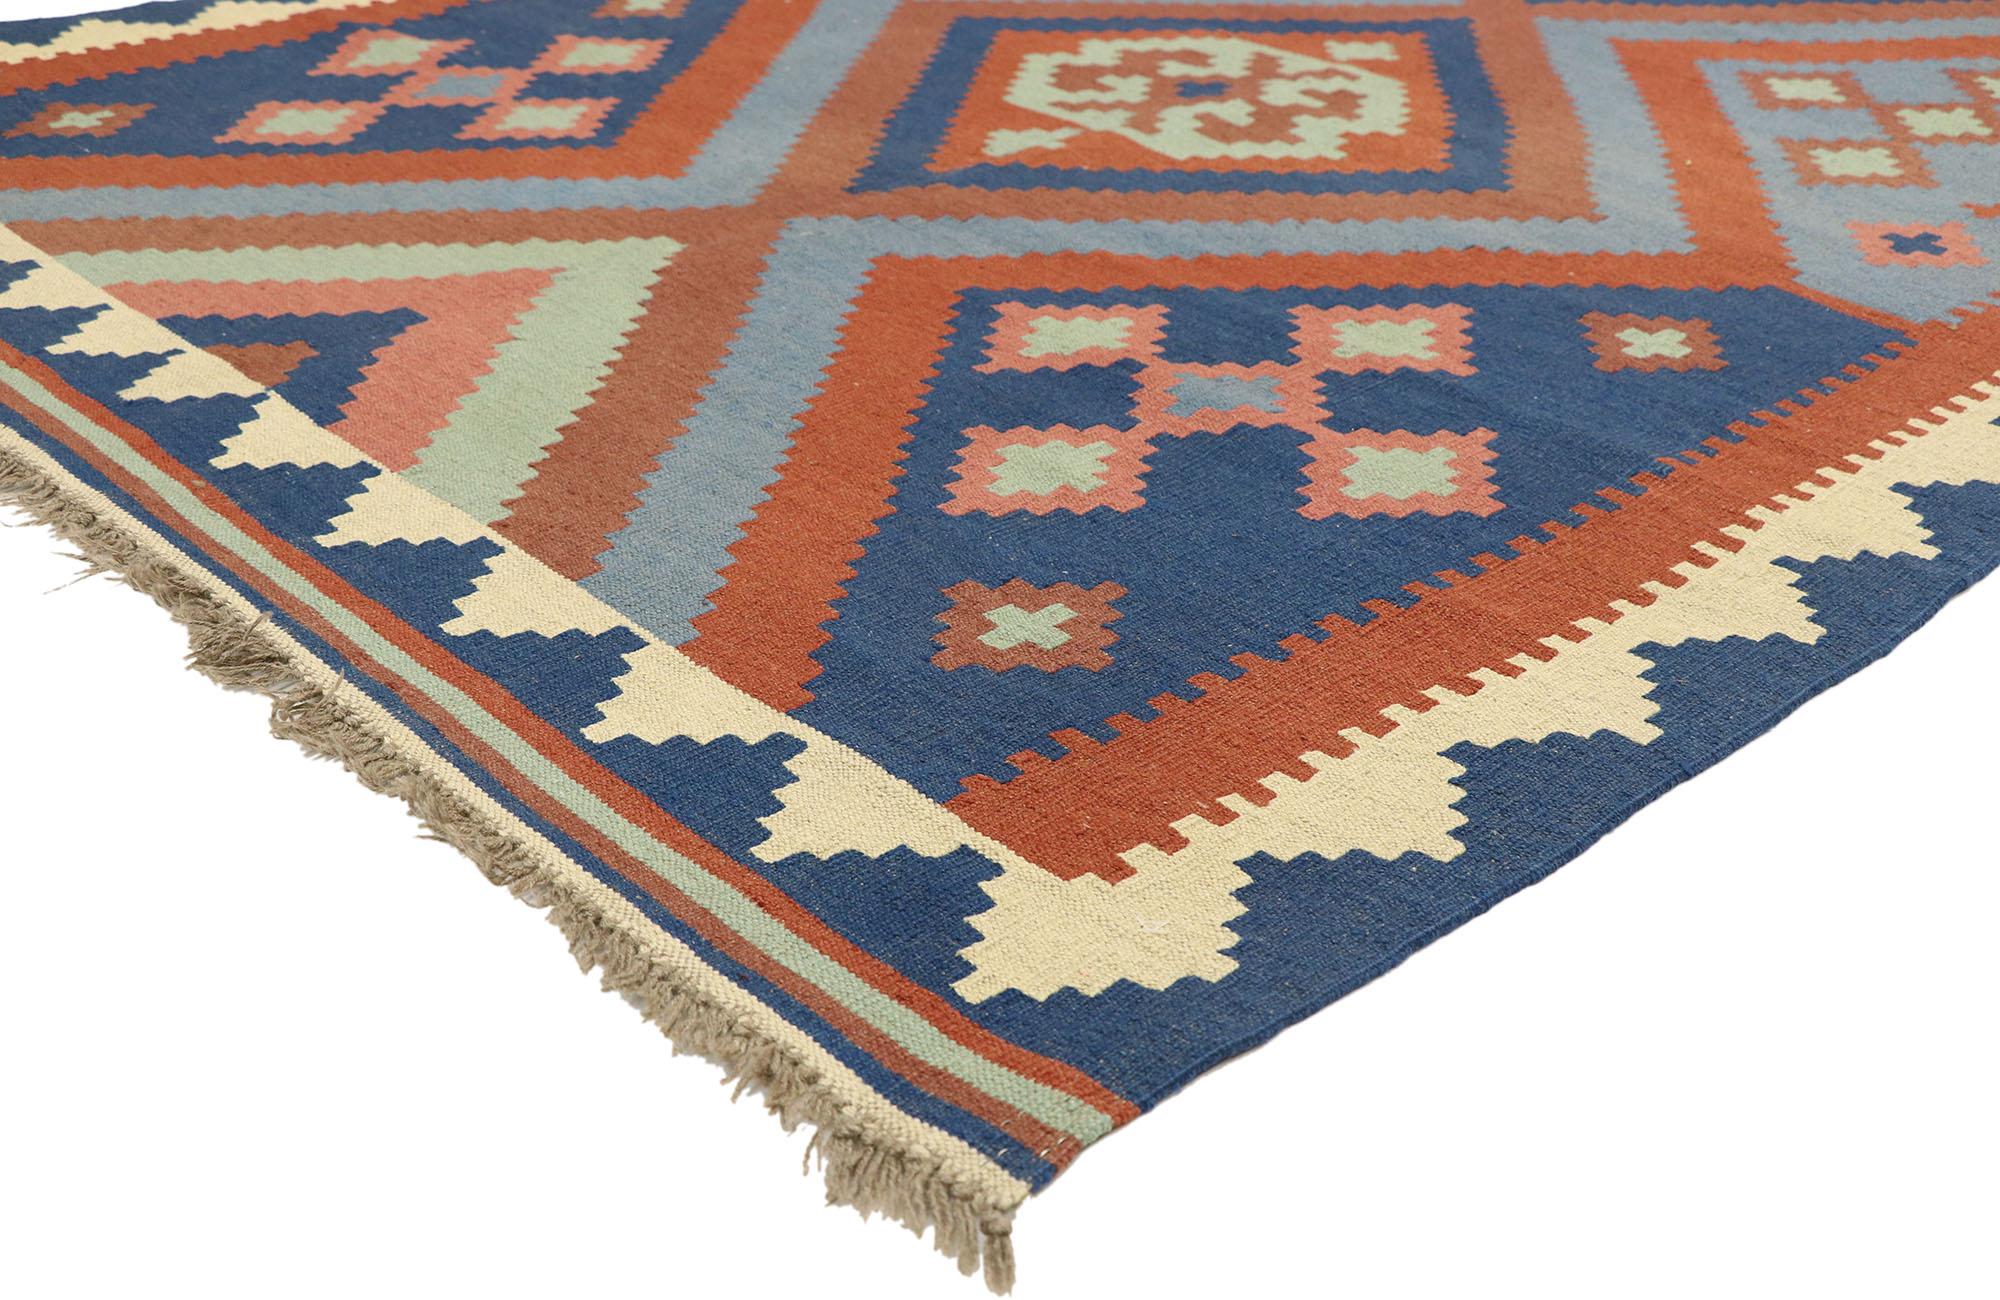 71974 vintage Afghan Kilim rug with Native American Navajo two grey hills style 05'01 x 06'05. Captivating and emanating Navajo vibes and Adirondack Lodge style, this handwoven wool vintage Afghani Kilim rug features a central diamond lozenge